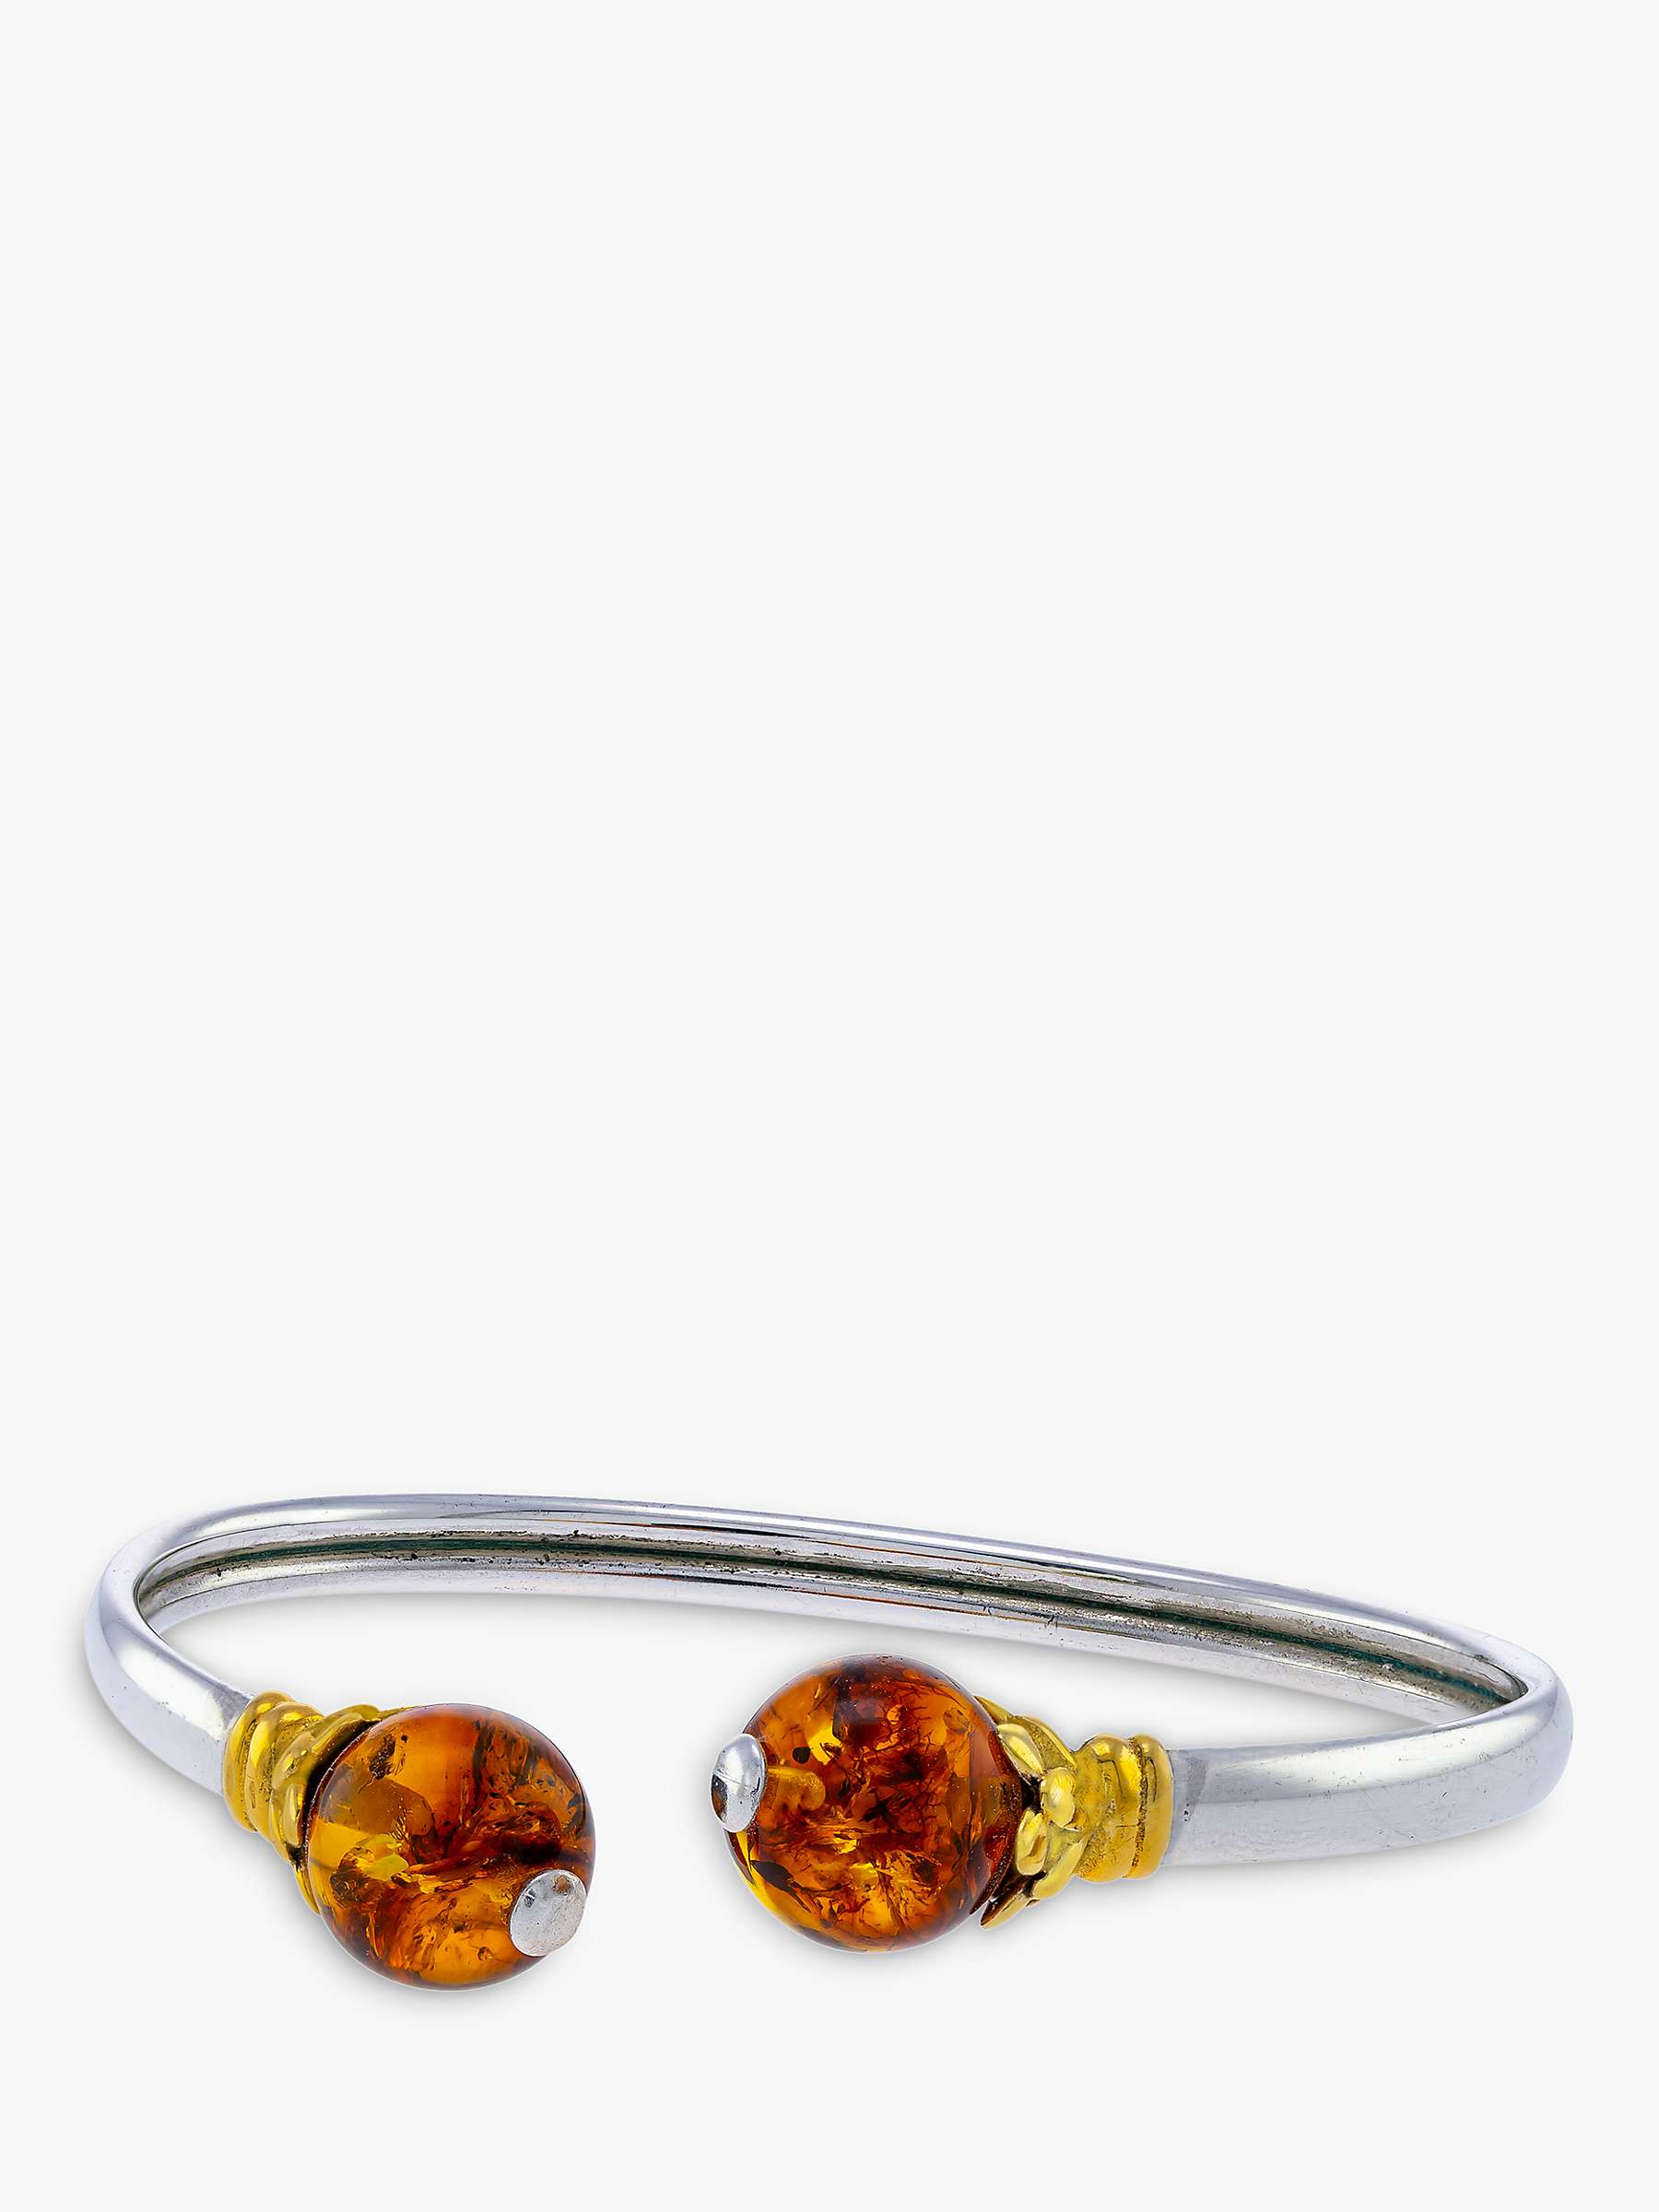 Buy Be-Jewelled Baltic Amber Two-Tone Cuff Bracelet, Silver/Cognac Online at johnlewis.com